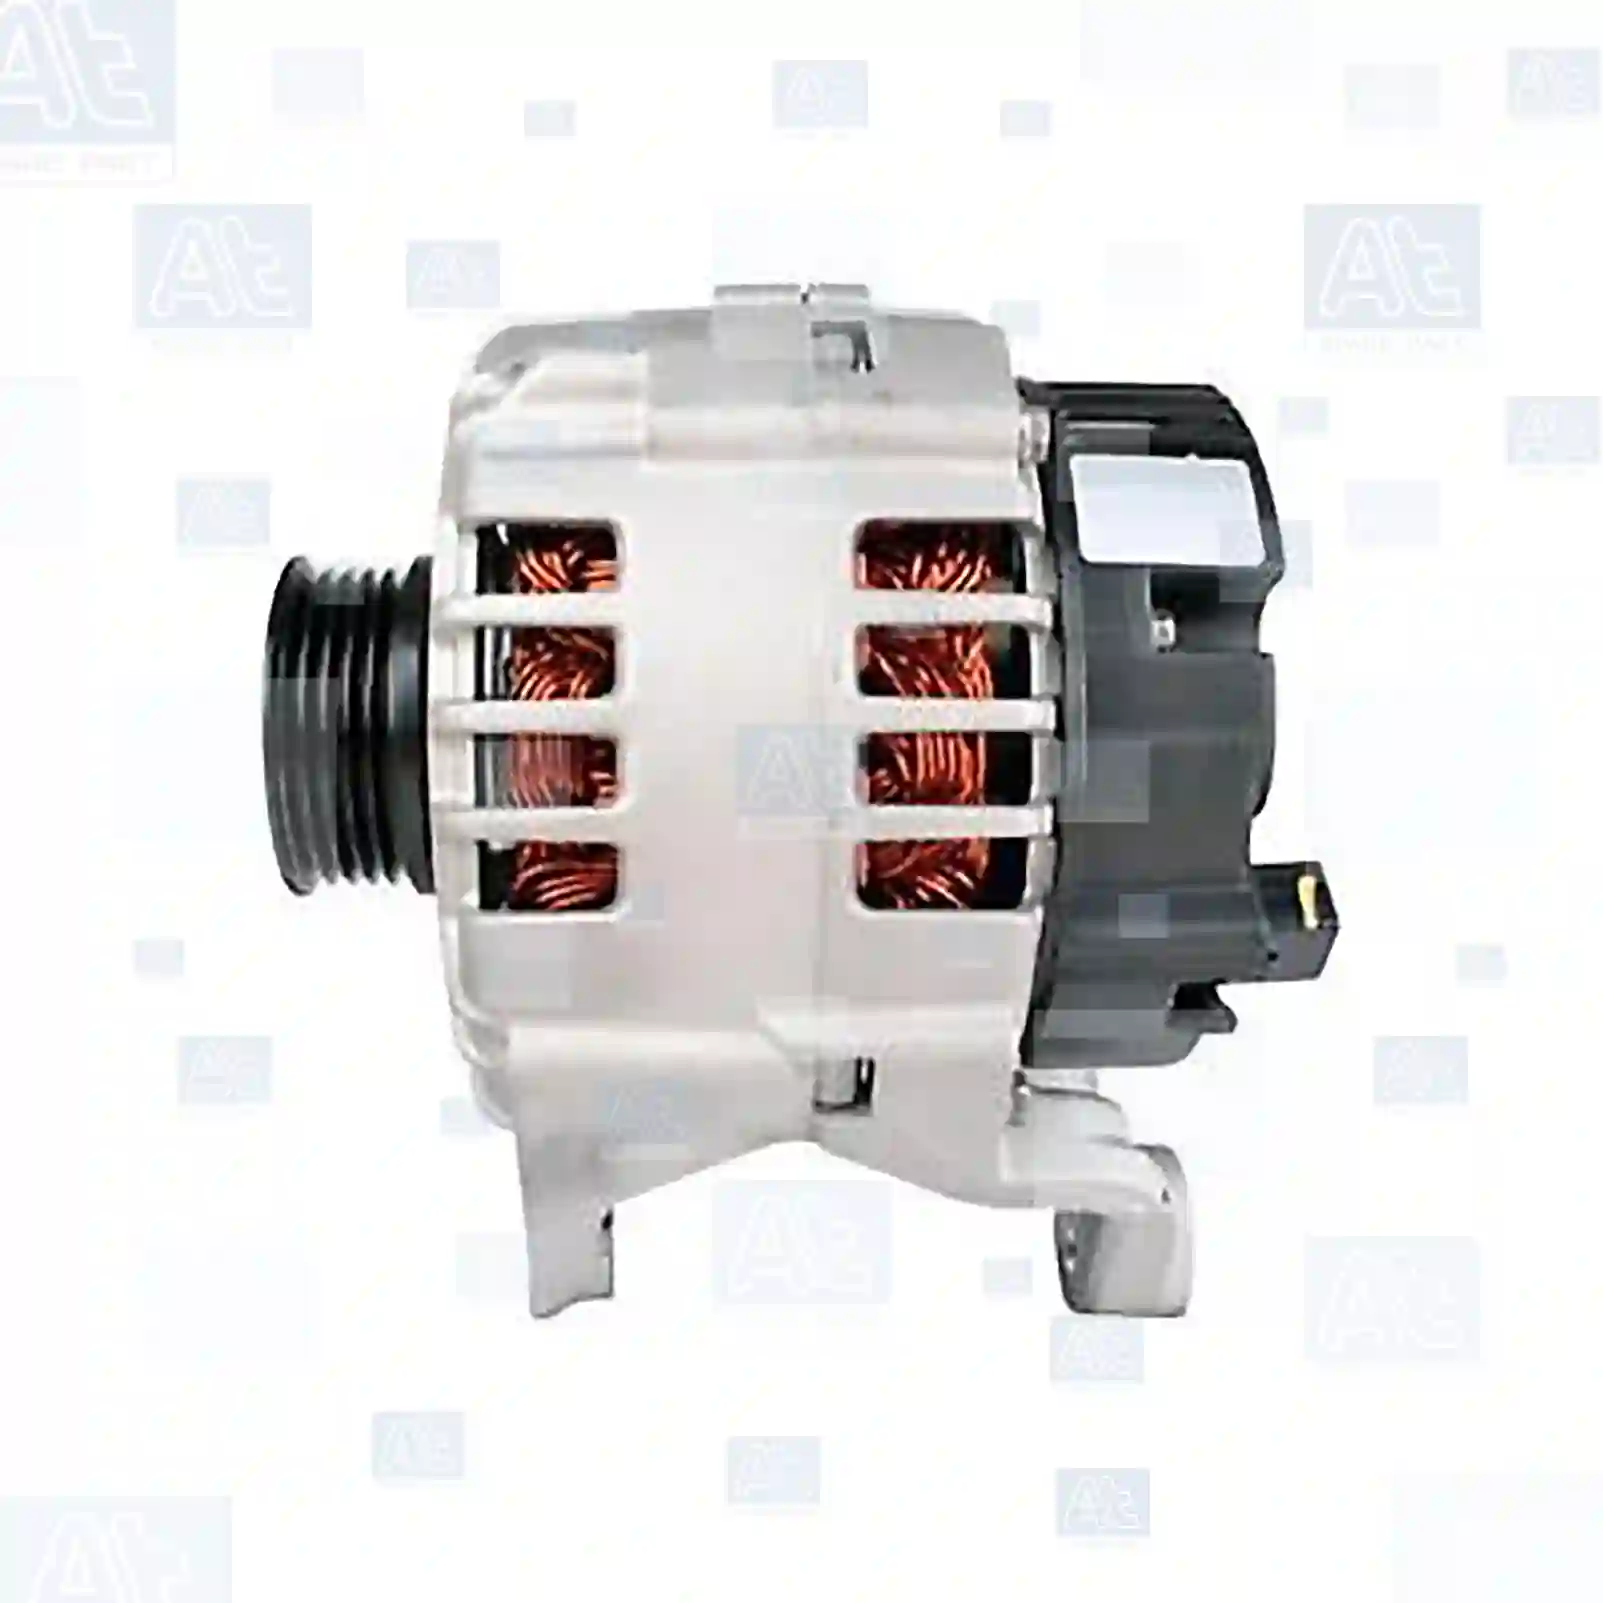 Alternator, at no 77710020, oem no: 038903018E, 059903015J, 06B903016A, 06B903016D, 071903016C, 078903016E, 078903016G, 1506770, 504009978, 5040099780, 71723401, 504009978, 5040099788, 038903018E, 059903015J, 06B903016A, 06B903016D, 071903016C, 078903016E, 078903016G, 504009978, 038903018E, 038903018EX, 059903015J, 06B903016A, 06B903016D, 071903016C, 078903016E, 078903016G At Spare Part | Engine, Accelerator Pedal, Camshaft, Connecting Rod, Crankcase, Crankshaft, Cylinder Head, Engine Suspension Mountings, Exhaust Manifold, Exhaust Gas Recirculation, Filter Kits, Flywheel Housing, General Overhaul Kits, Engine, Intake Manifold, Oil Cleaner, Oil Cooler, Oil Filter, Oil Pump, Oil Sump, Piston & Liner, Sensor & Switch, Timing Case, Turbocharger, Cooling System, Belt Tensioner, Coolant Filter, Coolant Pipe, Corrosion Prevention Agent, Drive, Expansion Tank, Fan, Intercooler, Monitors & Gauges, Radiator, Thermostat, V-Belt / Timing belt, Water Pump, Fuel System, Electronical Injector Unit, Feed Pump, Fuel Filter, cpl., Fuel Gauge Sender,  Fuel Line, Fuel Pump, Fuel Tank, Injection Line Kit, Injection Pump, Exhaust System, Clutch & Pedal, Gearbox, Propeller Shaft, Axles, Brake System, Hubs & Wheels, Suspension, Leaf Spring, Universal Parts / Accessories, Steering, Electrical System, Cabin Alternator, at no 77710020, oem no: 038903018E, 059903015J, 06B903016A, 06B903016D, 071903016C, 078903016E, 078903016G, 1506770, 504009978, 5040099780, 71723401, 504009978, 5040099788, 038903018E, 059903015J, 06B903016A, 06B903016D, 071903016C, 078903016E, 078903016G, 504009978, 038903018E, 038903018EX, 059903015J, 06B903016A, 06B903016D, 071903016C, 078903016E, 078903016G At Spare Part | Engine, Accelerator Pedal, Camshaft, Connecting Rod, Crankcase, Crankshaft, Cylinder Head, Engine Suspension Mountings, Exhaust Manifold, Exhaust Gas Recirculation, Filter Kits, Flywheel Housing, General Overhaul Kits, Engine, Intake Manifold, Oil Cleaner, Oil Cooler, Oil Filter, Oil Pump, Oil Sump, Piston & Liner, Sensor & Switch, Timing Case, Turbocharger, Cooling System, Belt Tensioner, Coolant Filter, Coolant Pipe, Corrosion Prevention Agent, Drive, Expansion Tank, Fan, Intercooler, Monitors & Gauges, Radiator, Thermostat, V-Belt / Timing belt, Water Pump, Fuel System, Electronical Injector Unit, Feed Pump, Fuel Filter, cpl., Fuel Gauge Sender,  Fuel Line, Fuel Pump, Fuel Tank, Injection Line Kit, Injection Pump, Exhaust System, Clutch & Pedal, Gearbox, Propeller Shaft, Axles, Brake System, Hubs & Wheels, Suspension, Leaf Spring, Universal Parts / Accessories, Steering, Electrical System, Cabin